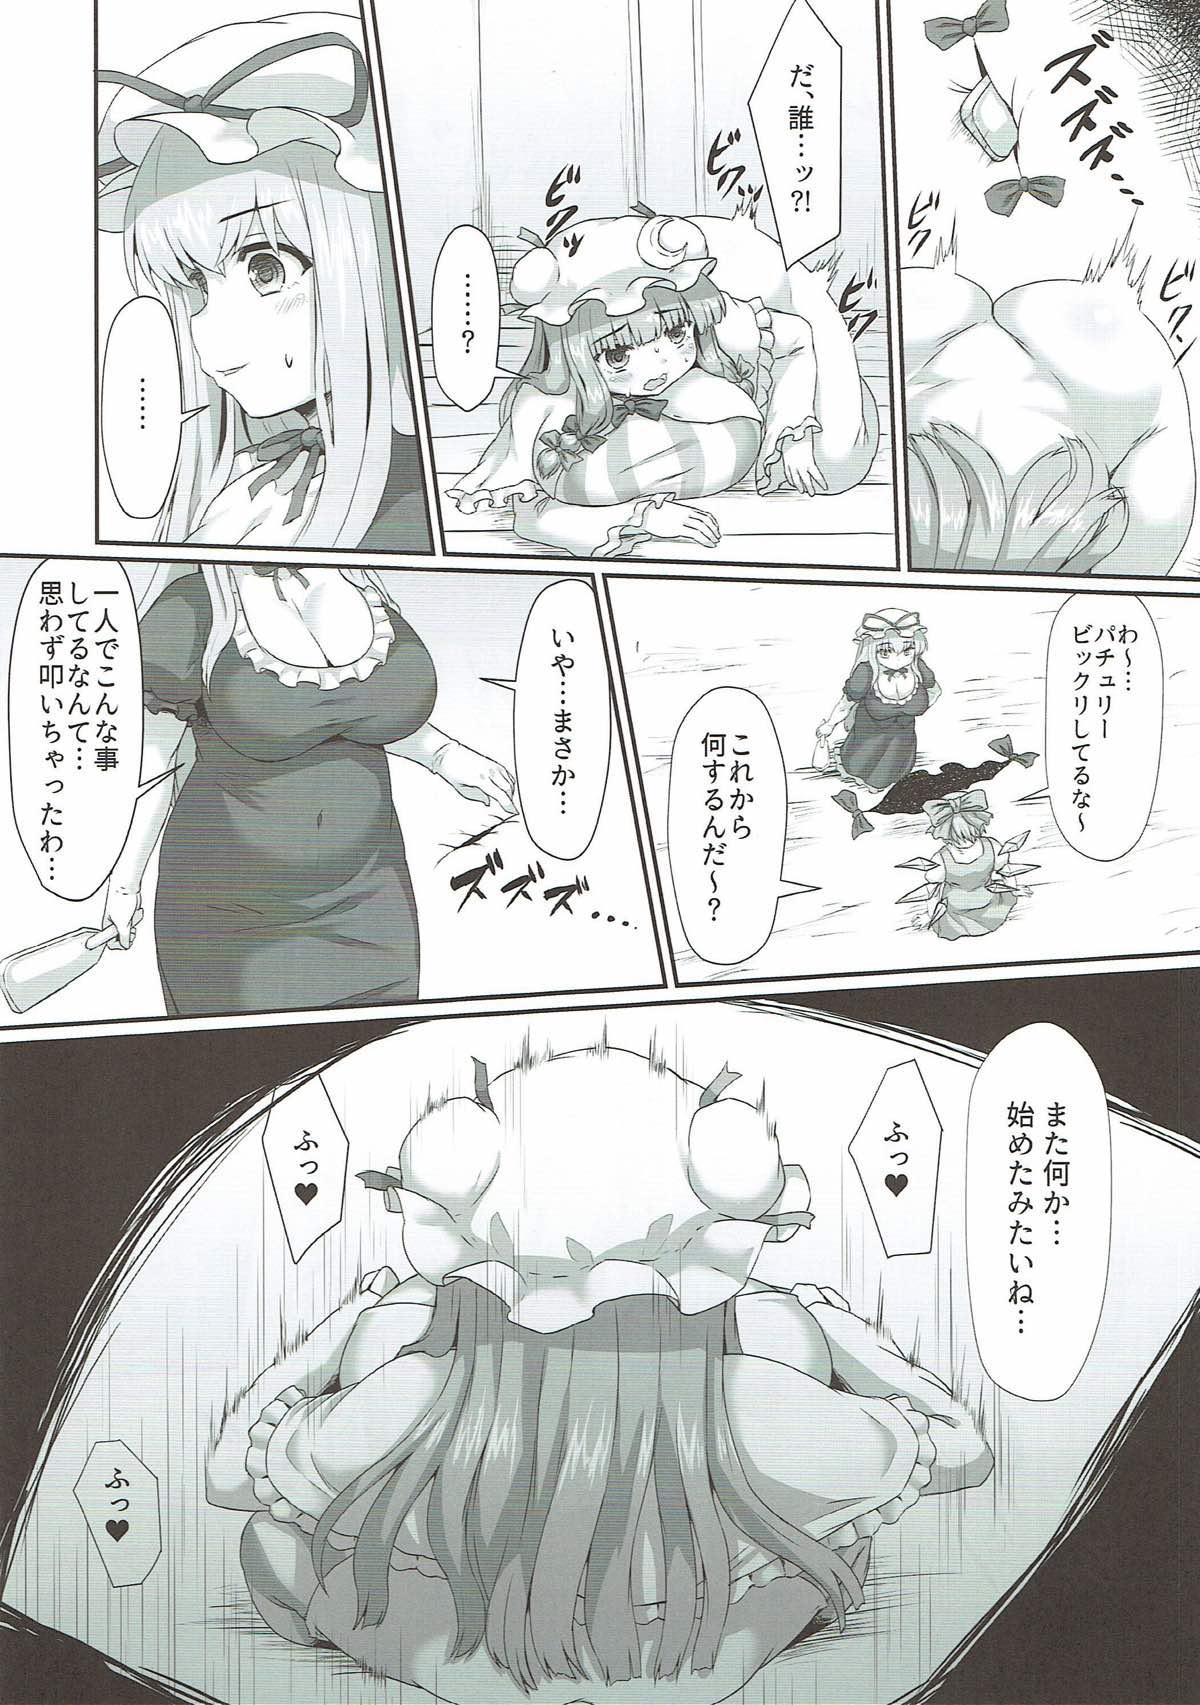 Bisex パチュリーの尻穴本 - Touhou project Straight Porn - Page 5